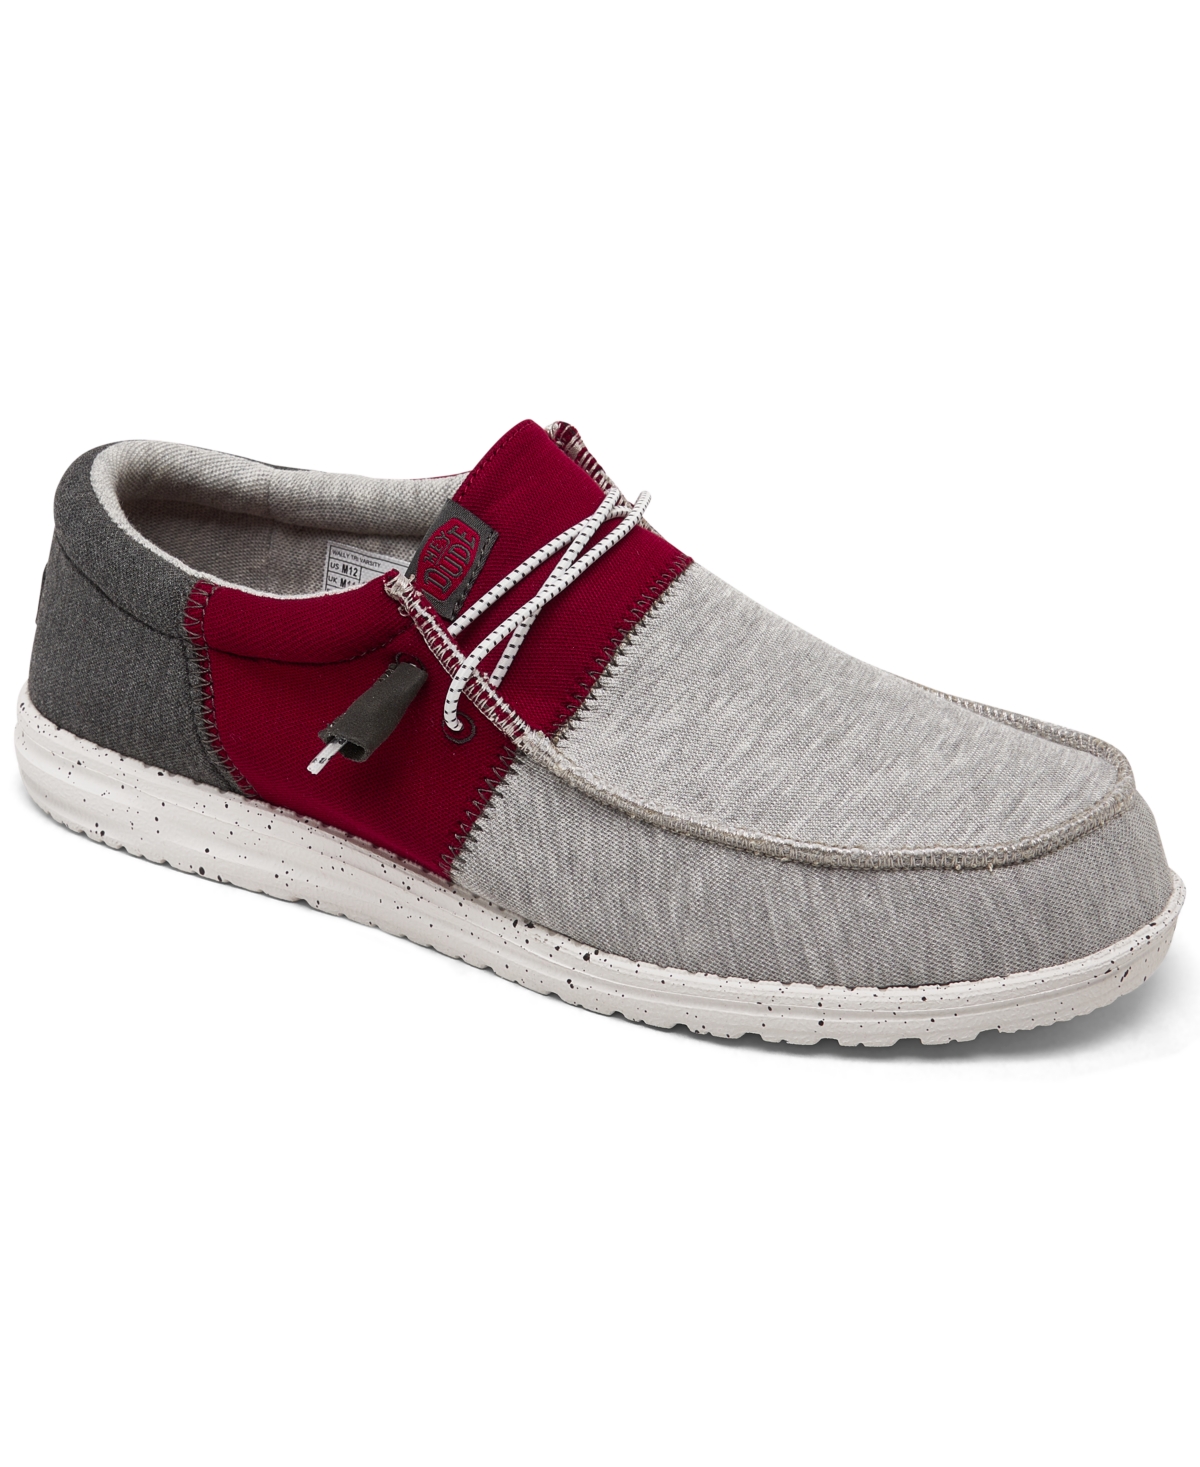 Men's Wally Tri Varsity Casual Moccasin Sneakers from Finish Line - Crimson